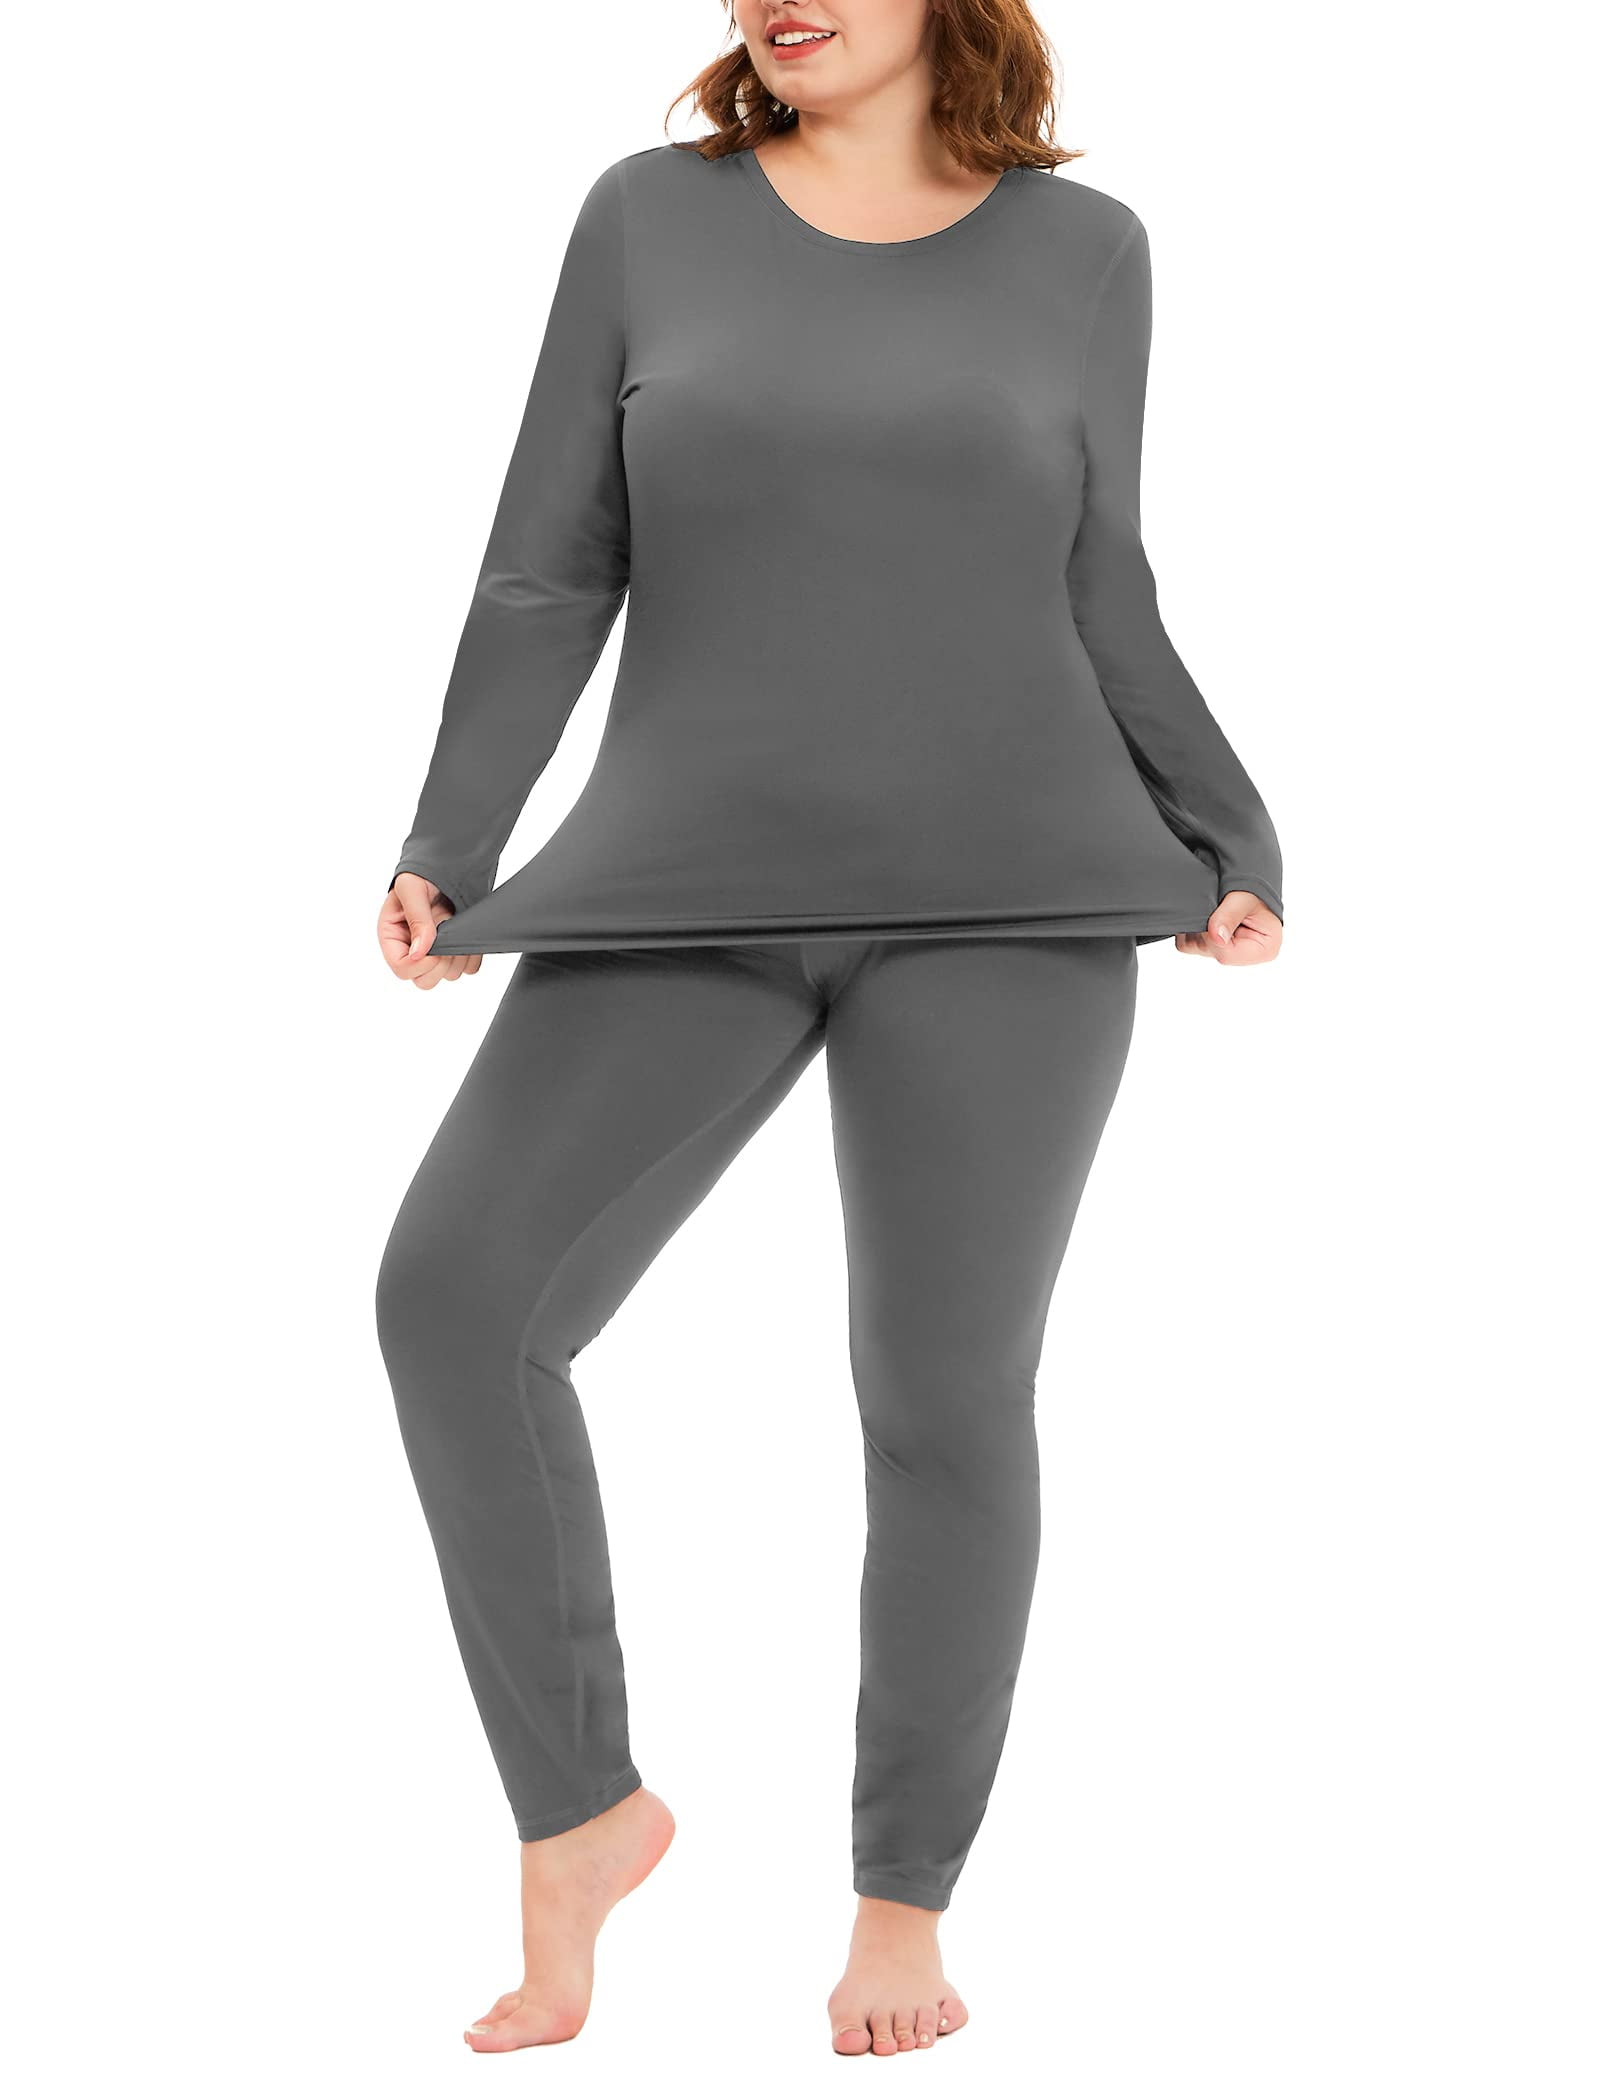 TIYOMI Plus Size 5X Dark Grey Thermal Underwear Suits For Women Long Johns  Fleece Lined Base Layer Crewneck Top and Bottom Sets Fall Winter Pajama,  2-Pack 5XL 26W 28W 